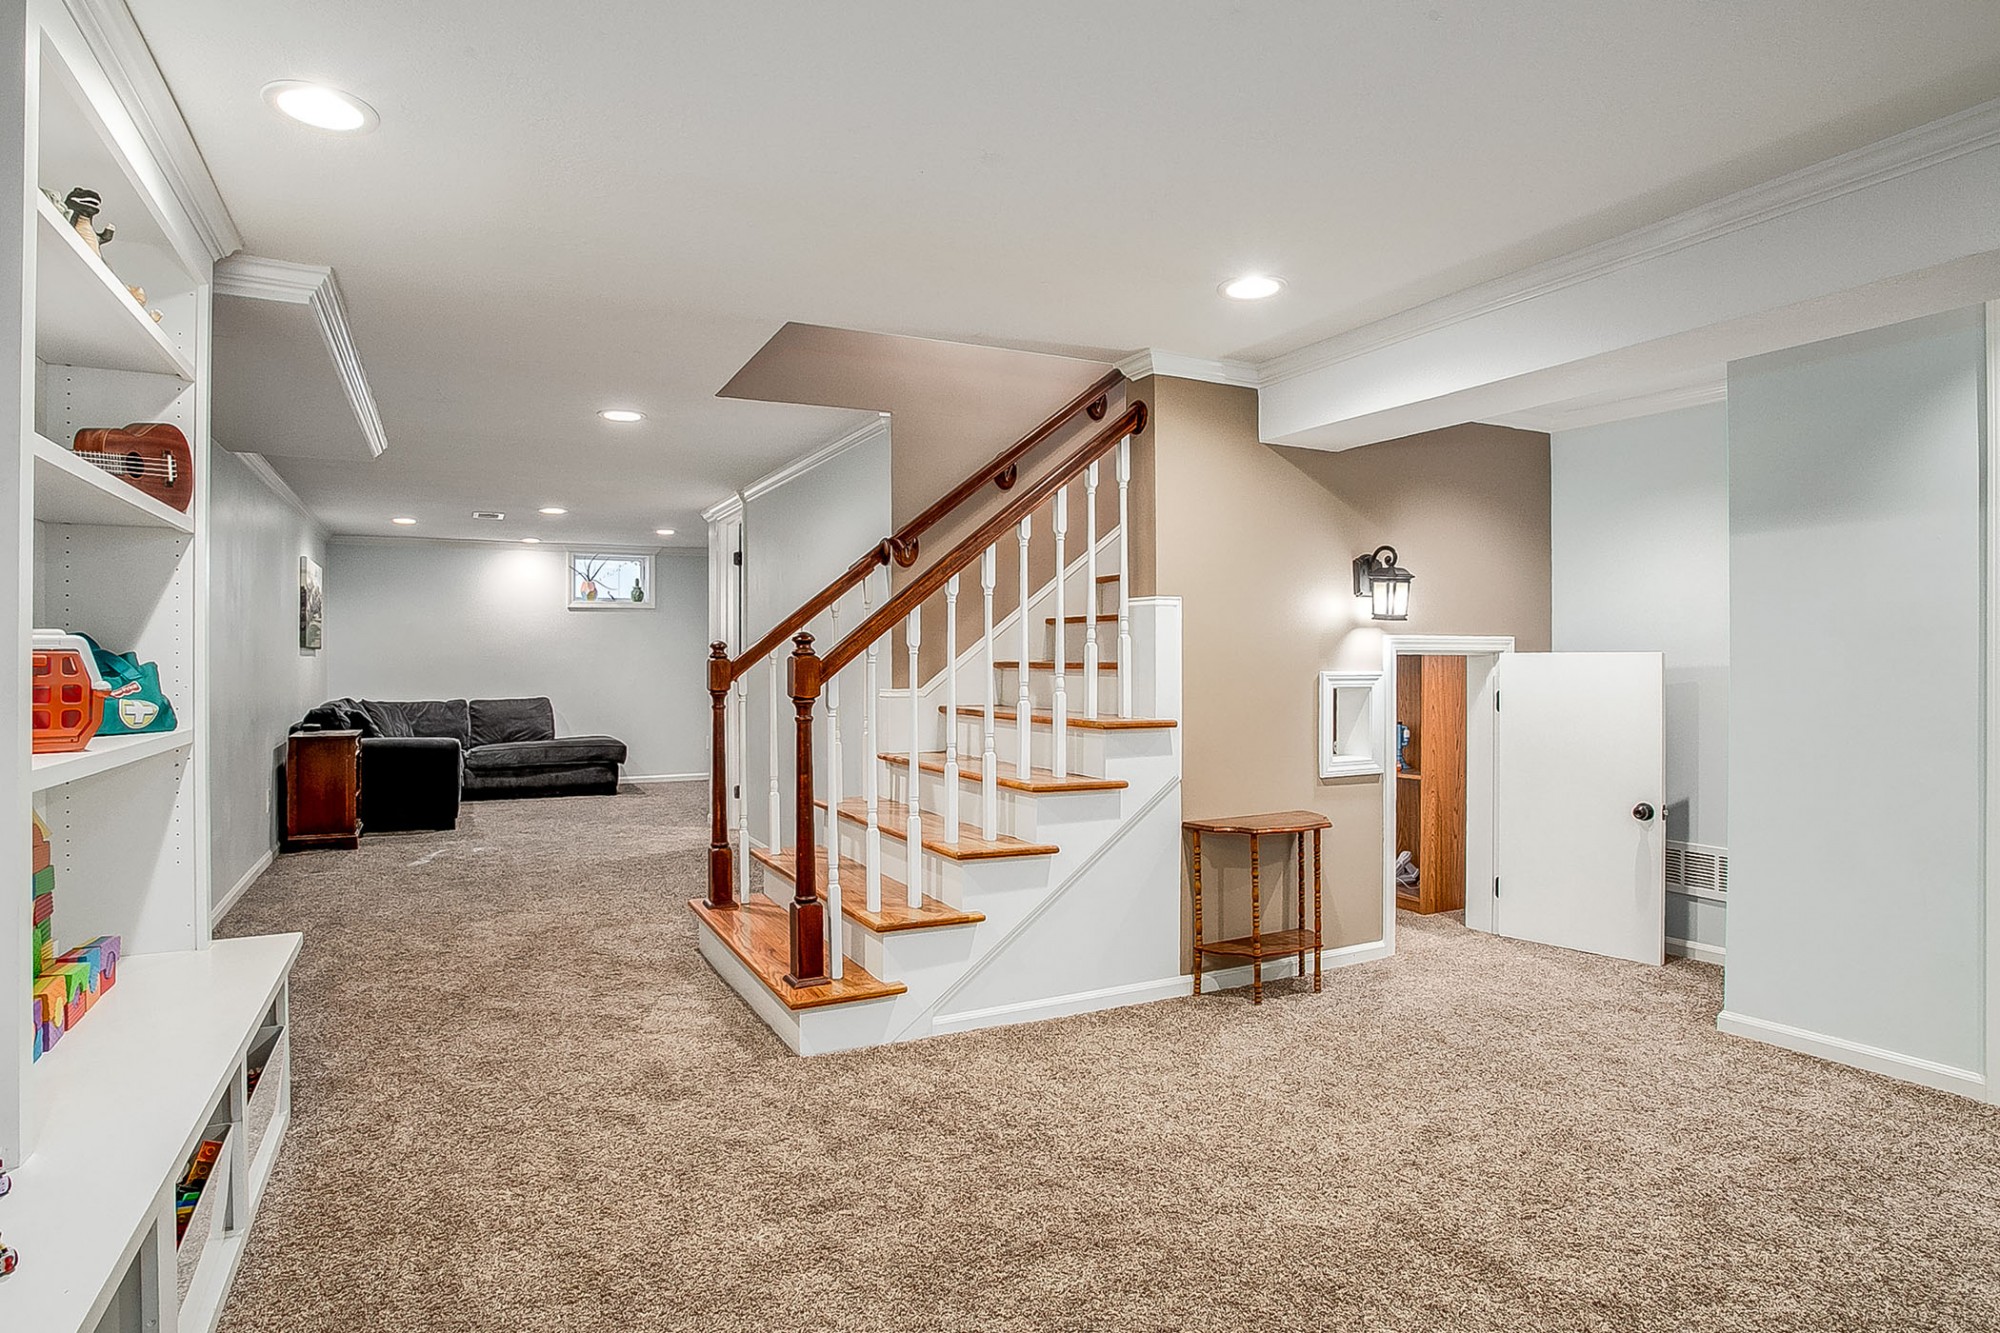 Downstairs, you will enjoy the newer finished basement, including multiple spaces for gathering with family and friends. 